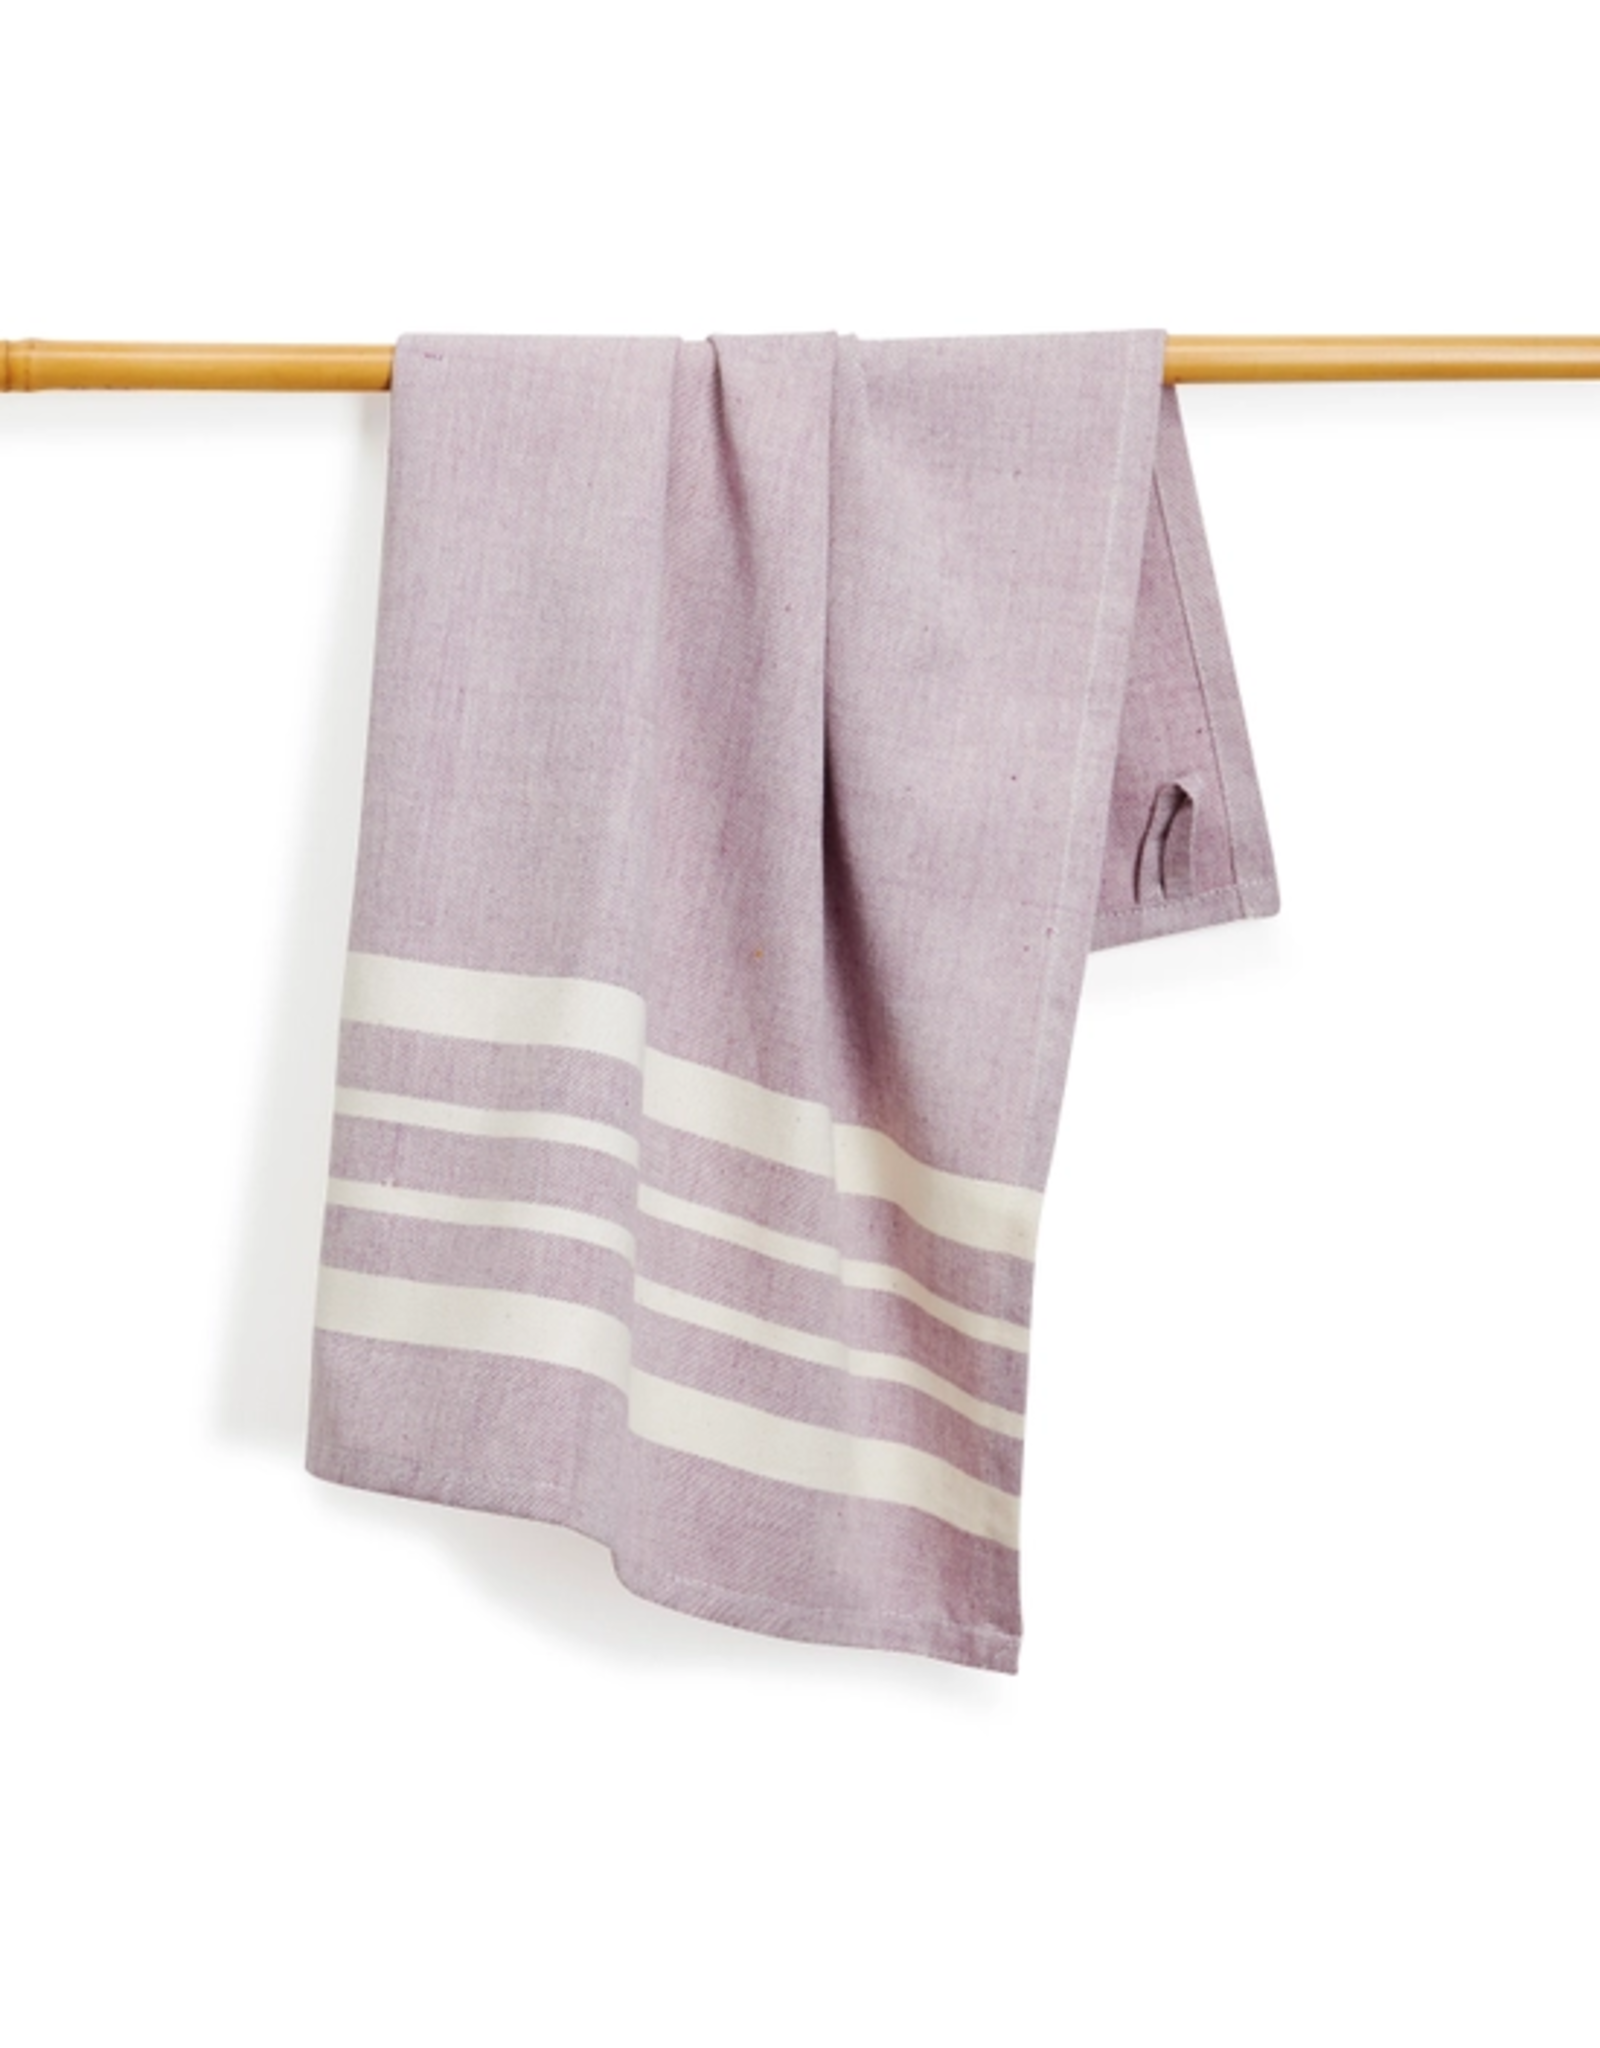 Trade roots 27 x 19 Cotton Handwoven Kitchen Towel Eggplant, India